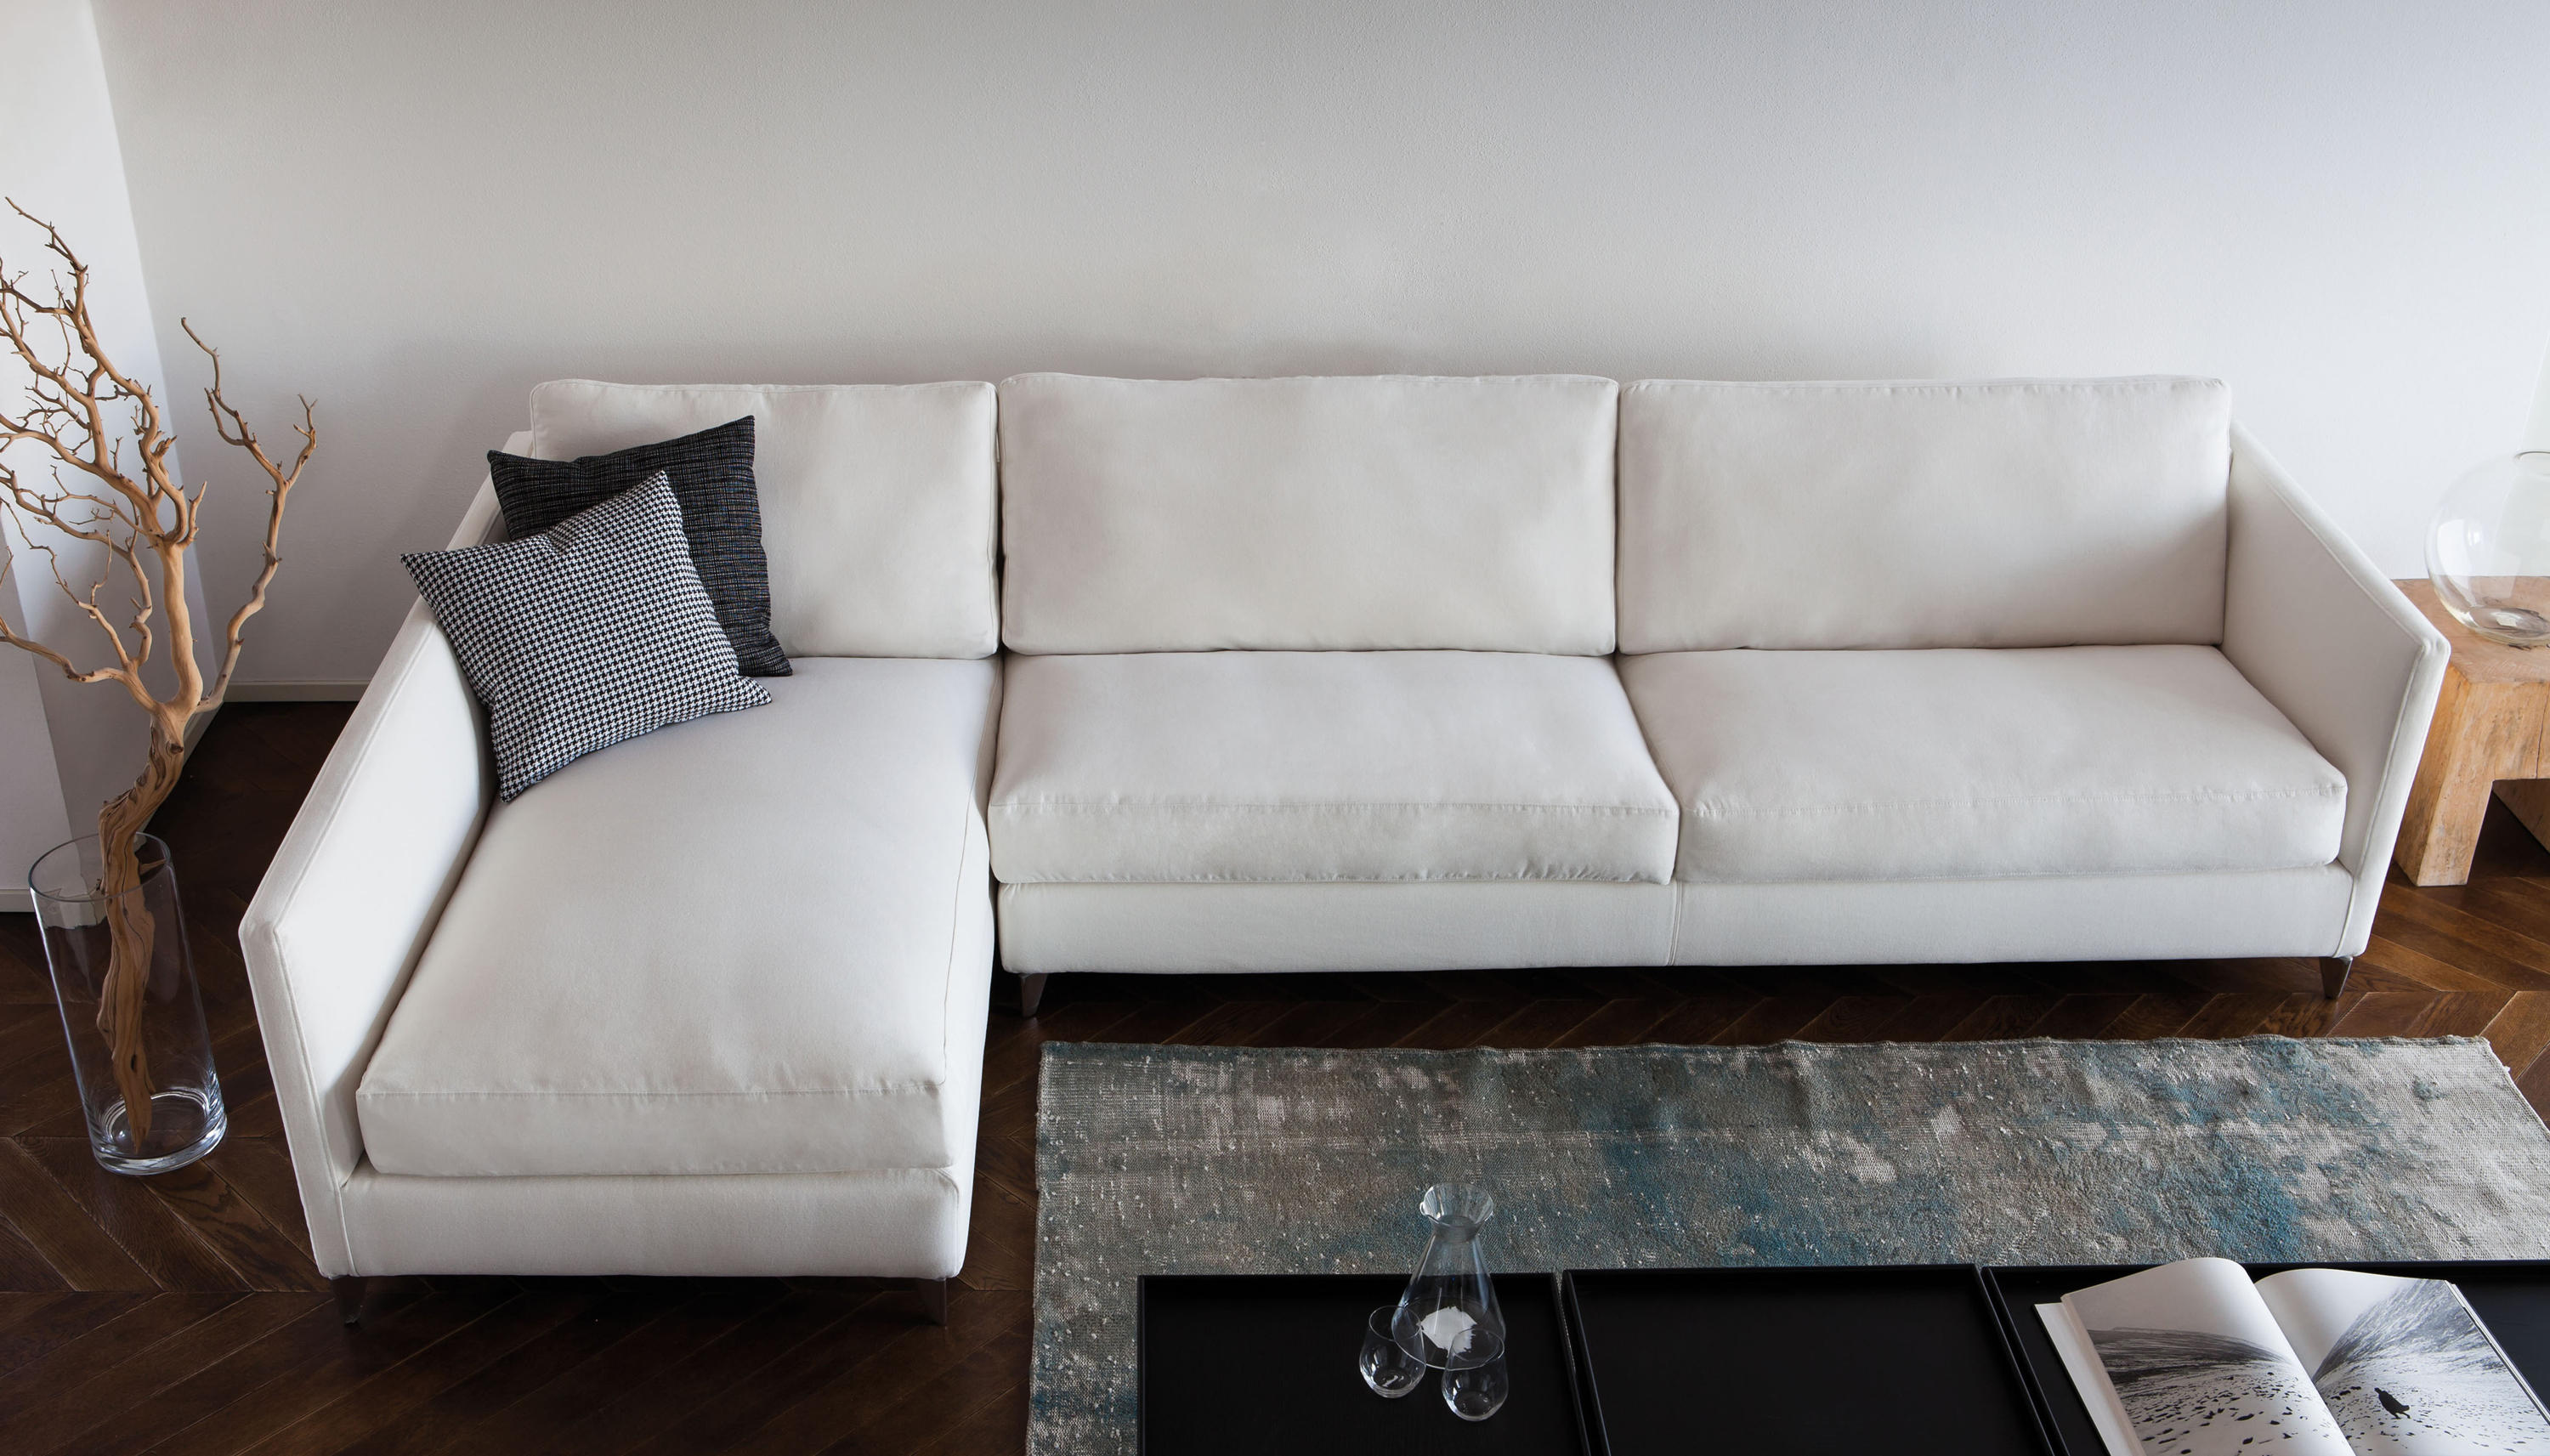 ZONE 940 FORT XL SOFA Modular sofa systems from Vibieffe